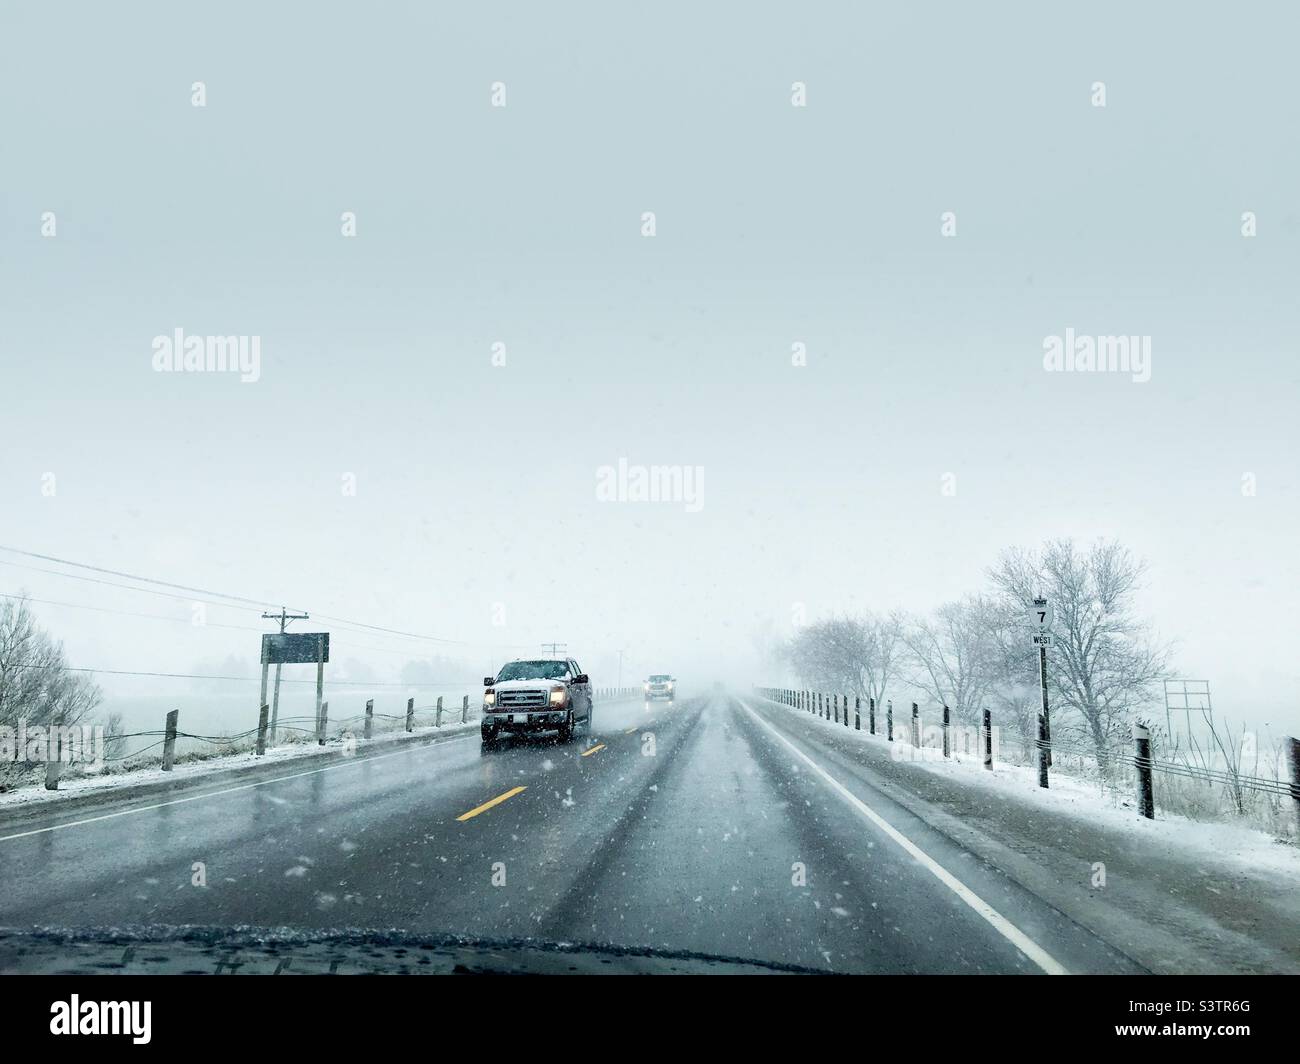 Vehicles approaching in a snow storm on a country road, Ontario, Canada. Big, ominous sky. Driver’s view. Stock Photo